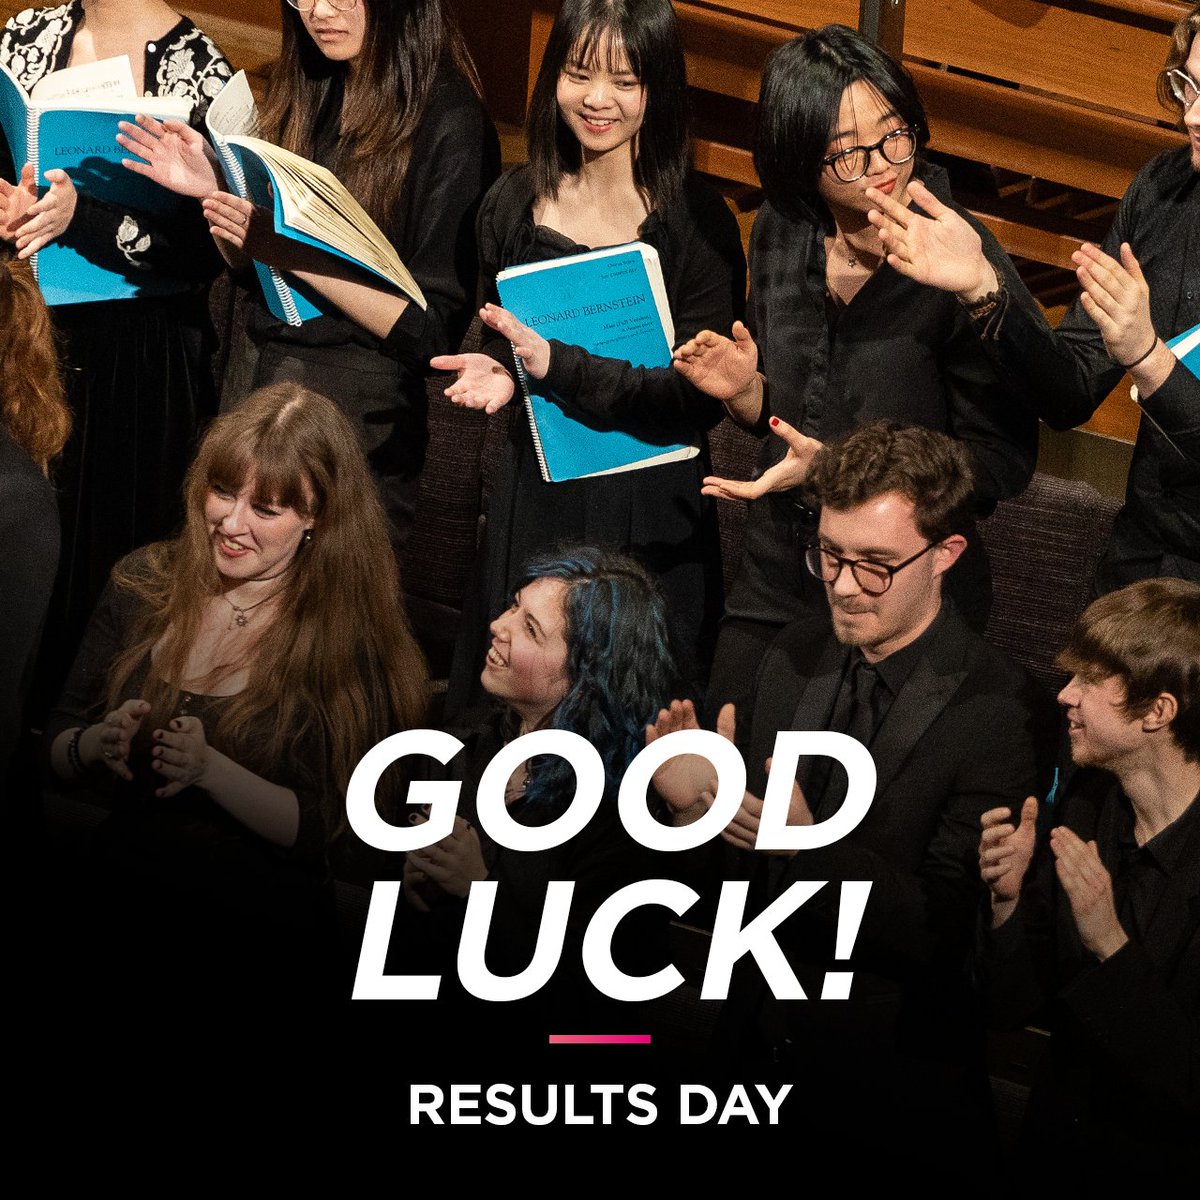 Wishing the very best of luck to everyone receiving their exam results today, and a huge congratulations to those of you who already received your SQA results earlier this month! If you have any questions, please get in touch at admissions@rncm.ac.uk and we’ll be happy to help!